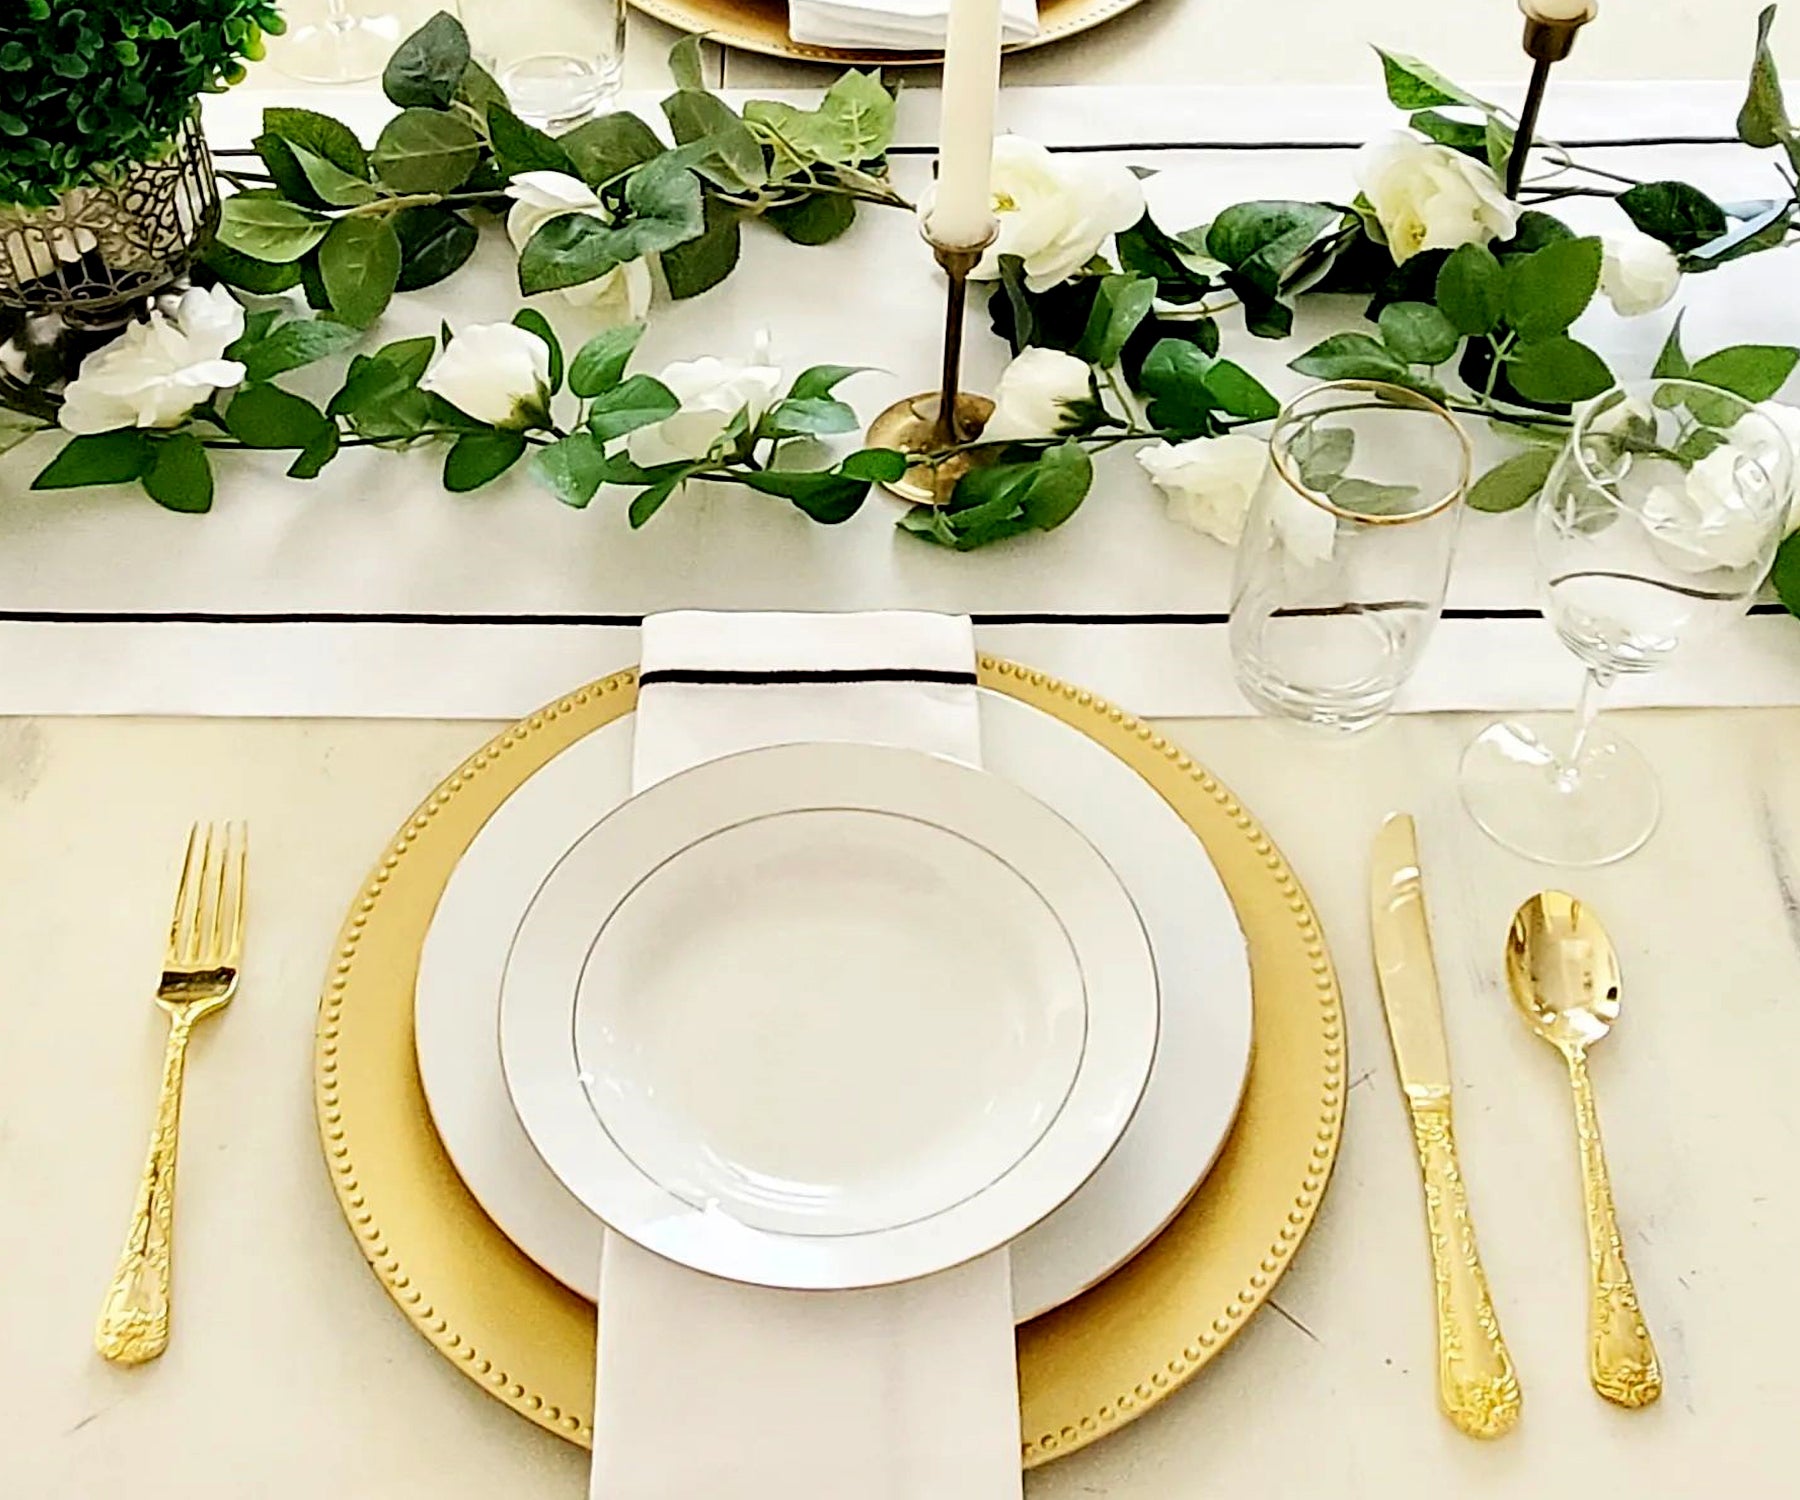 Perfect wedding table runner for a classic aesthetic.